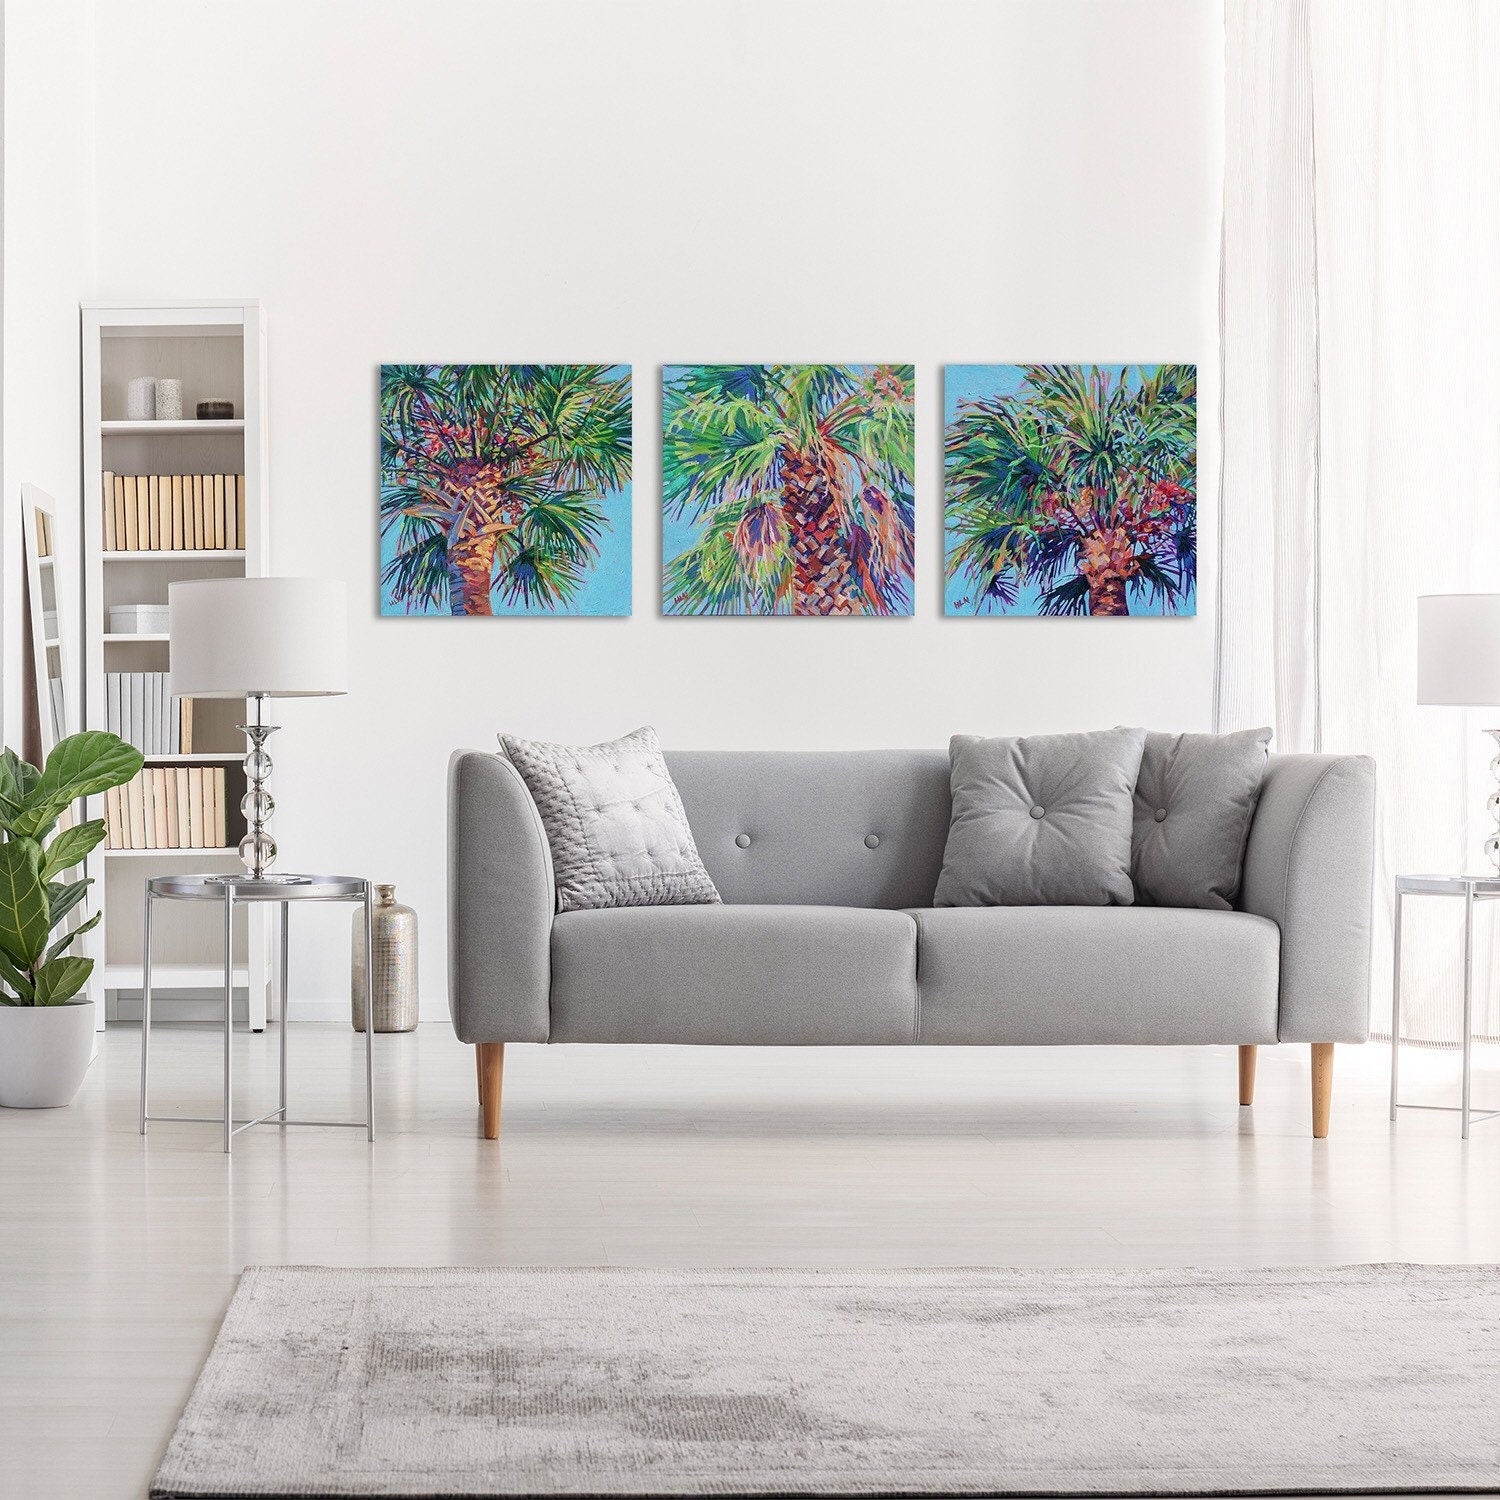 three cabbage palm tree paintings in bright living room setting